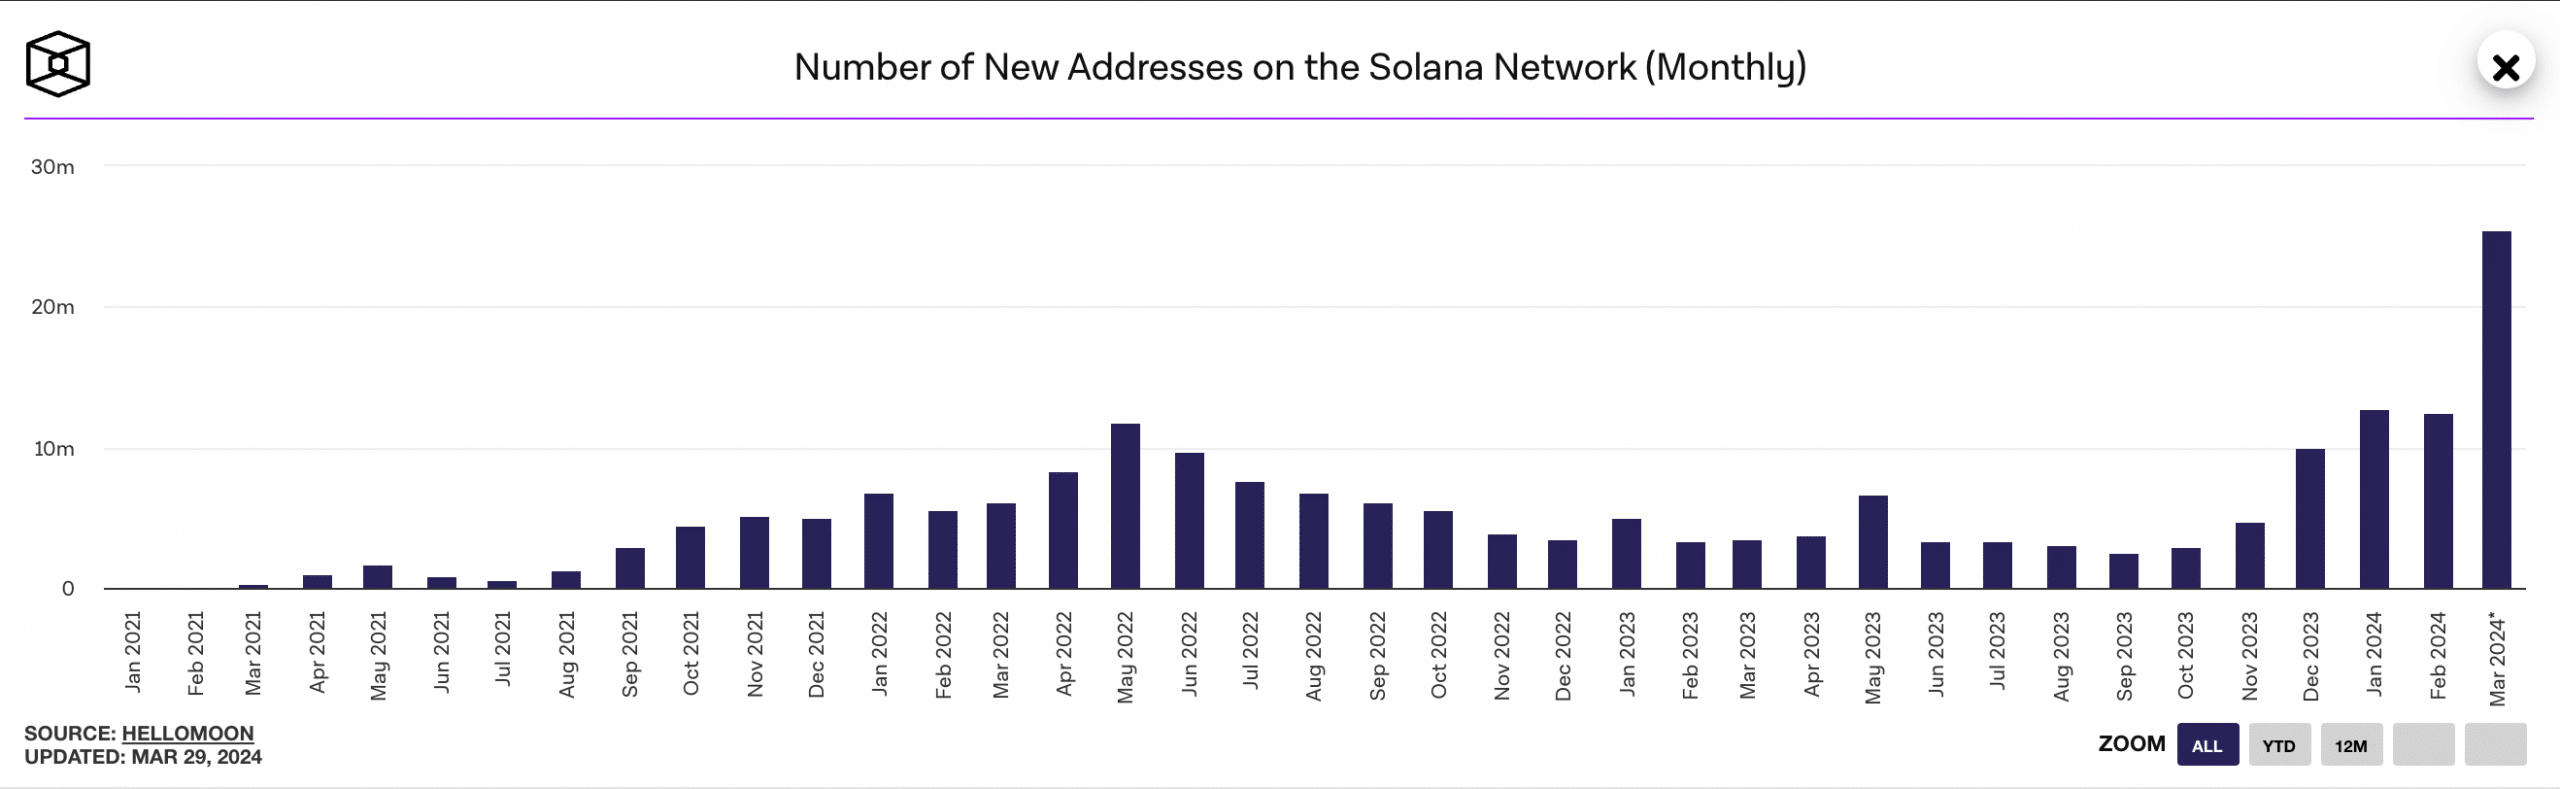 Solana New User Count